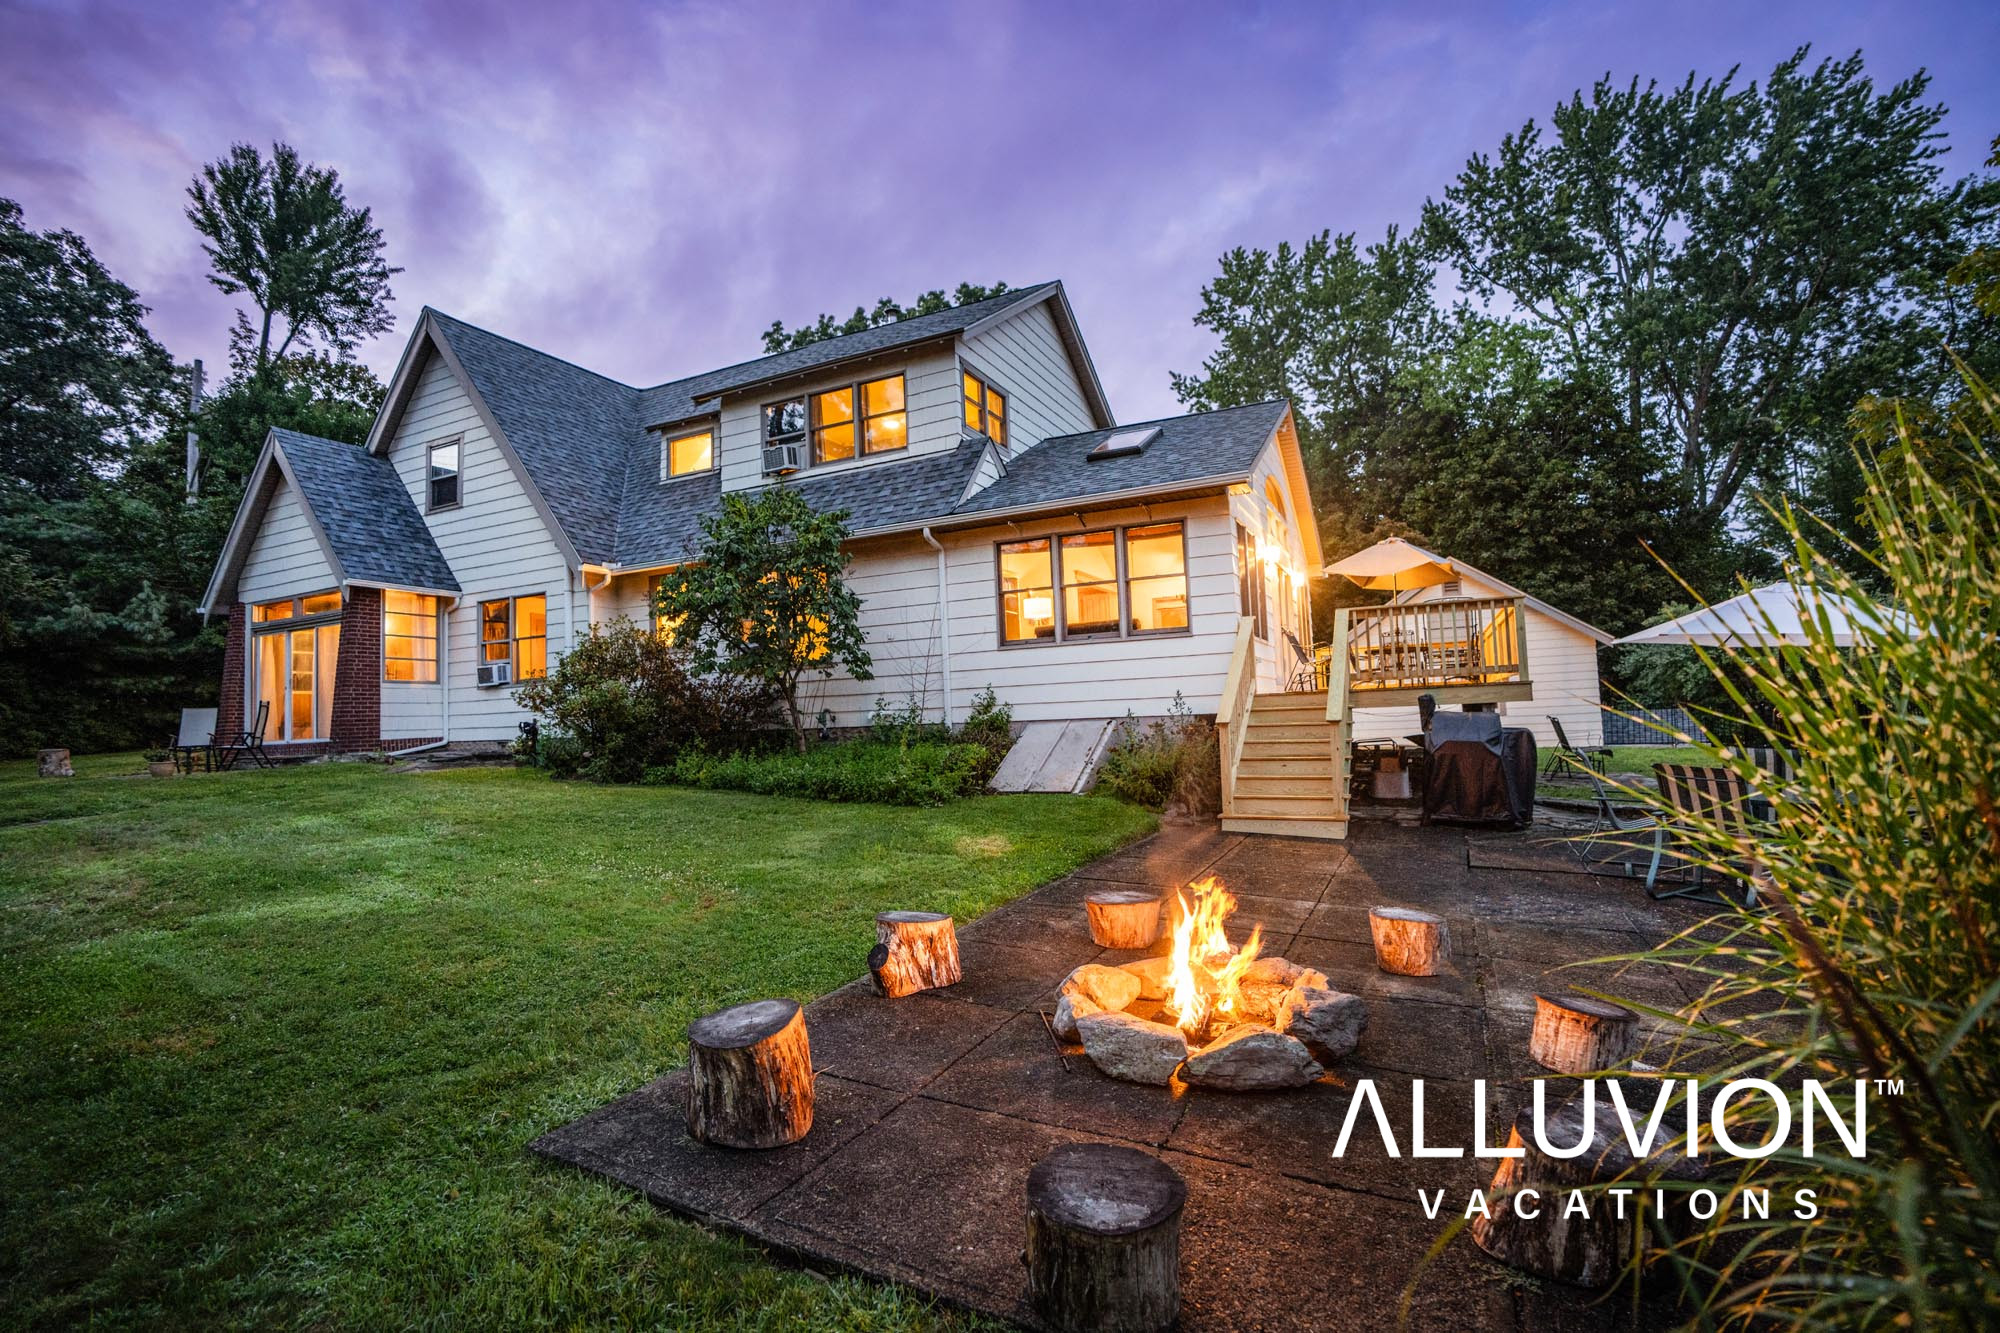 Experience a Fairytale Summer Getaway at Our Rustic Vacation Rental Retreat in Monroe, NY – Book now on Airbnb